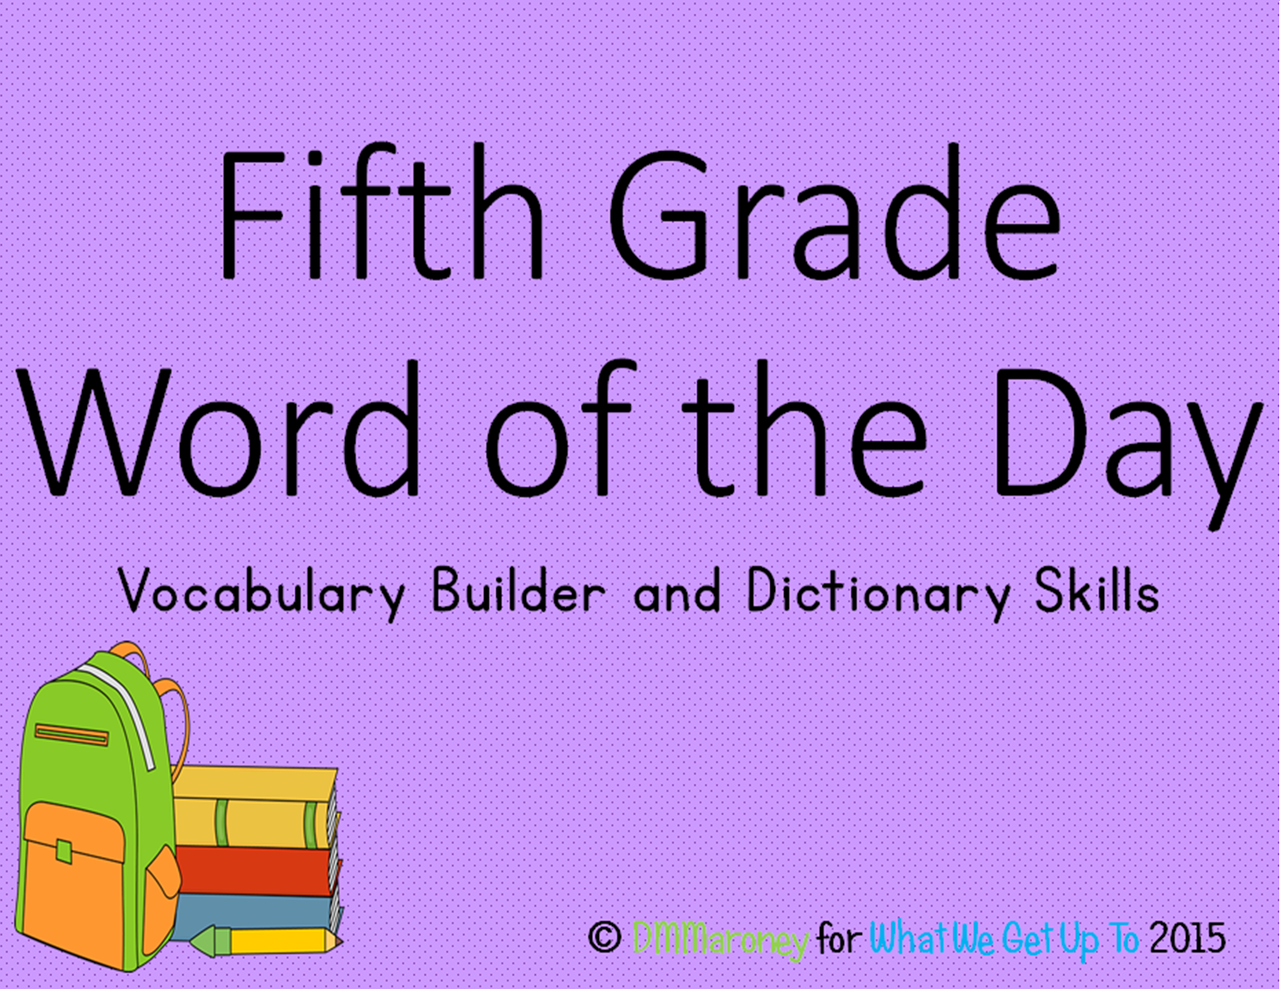 Fifth Grade Word of the Day and Vocabulary Builder